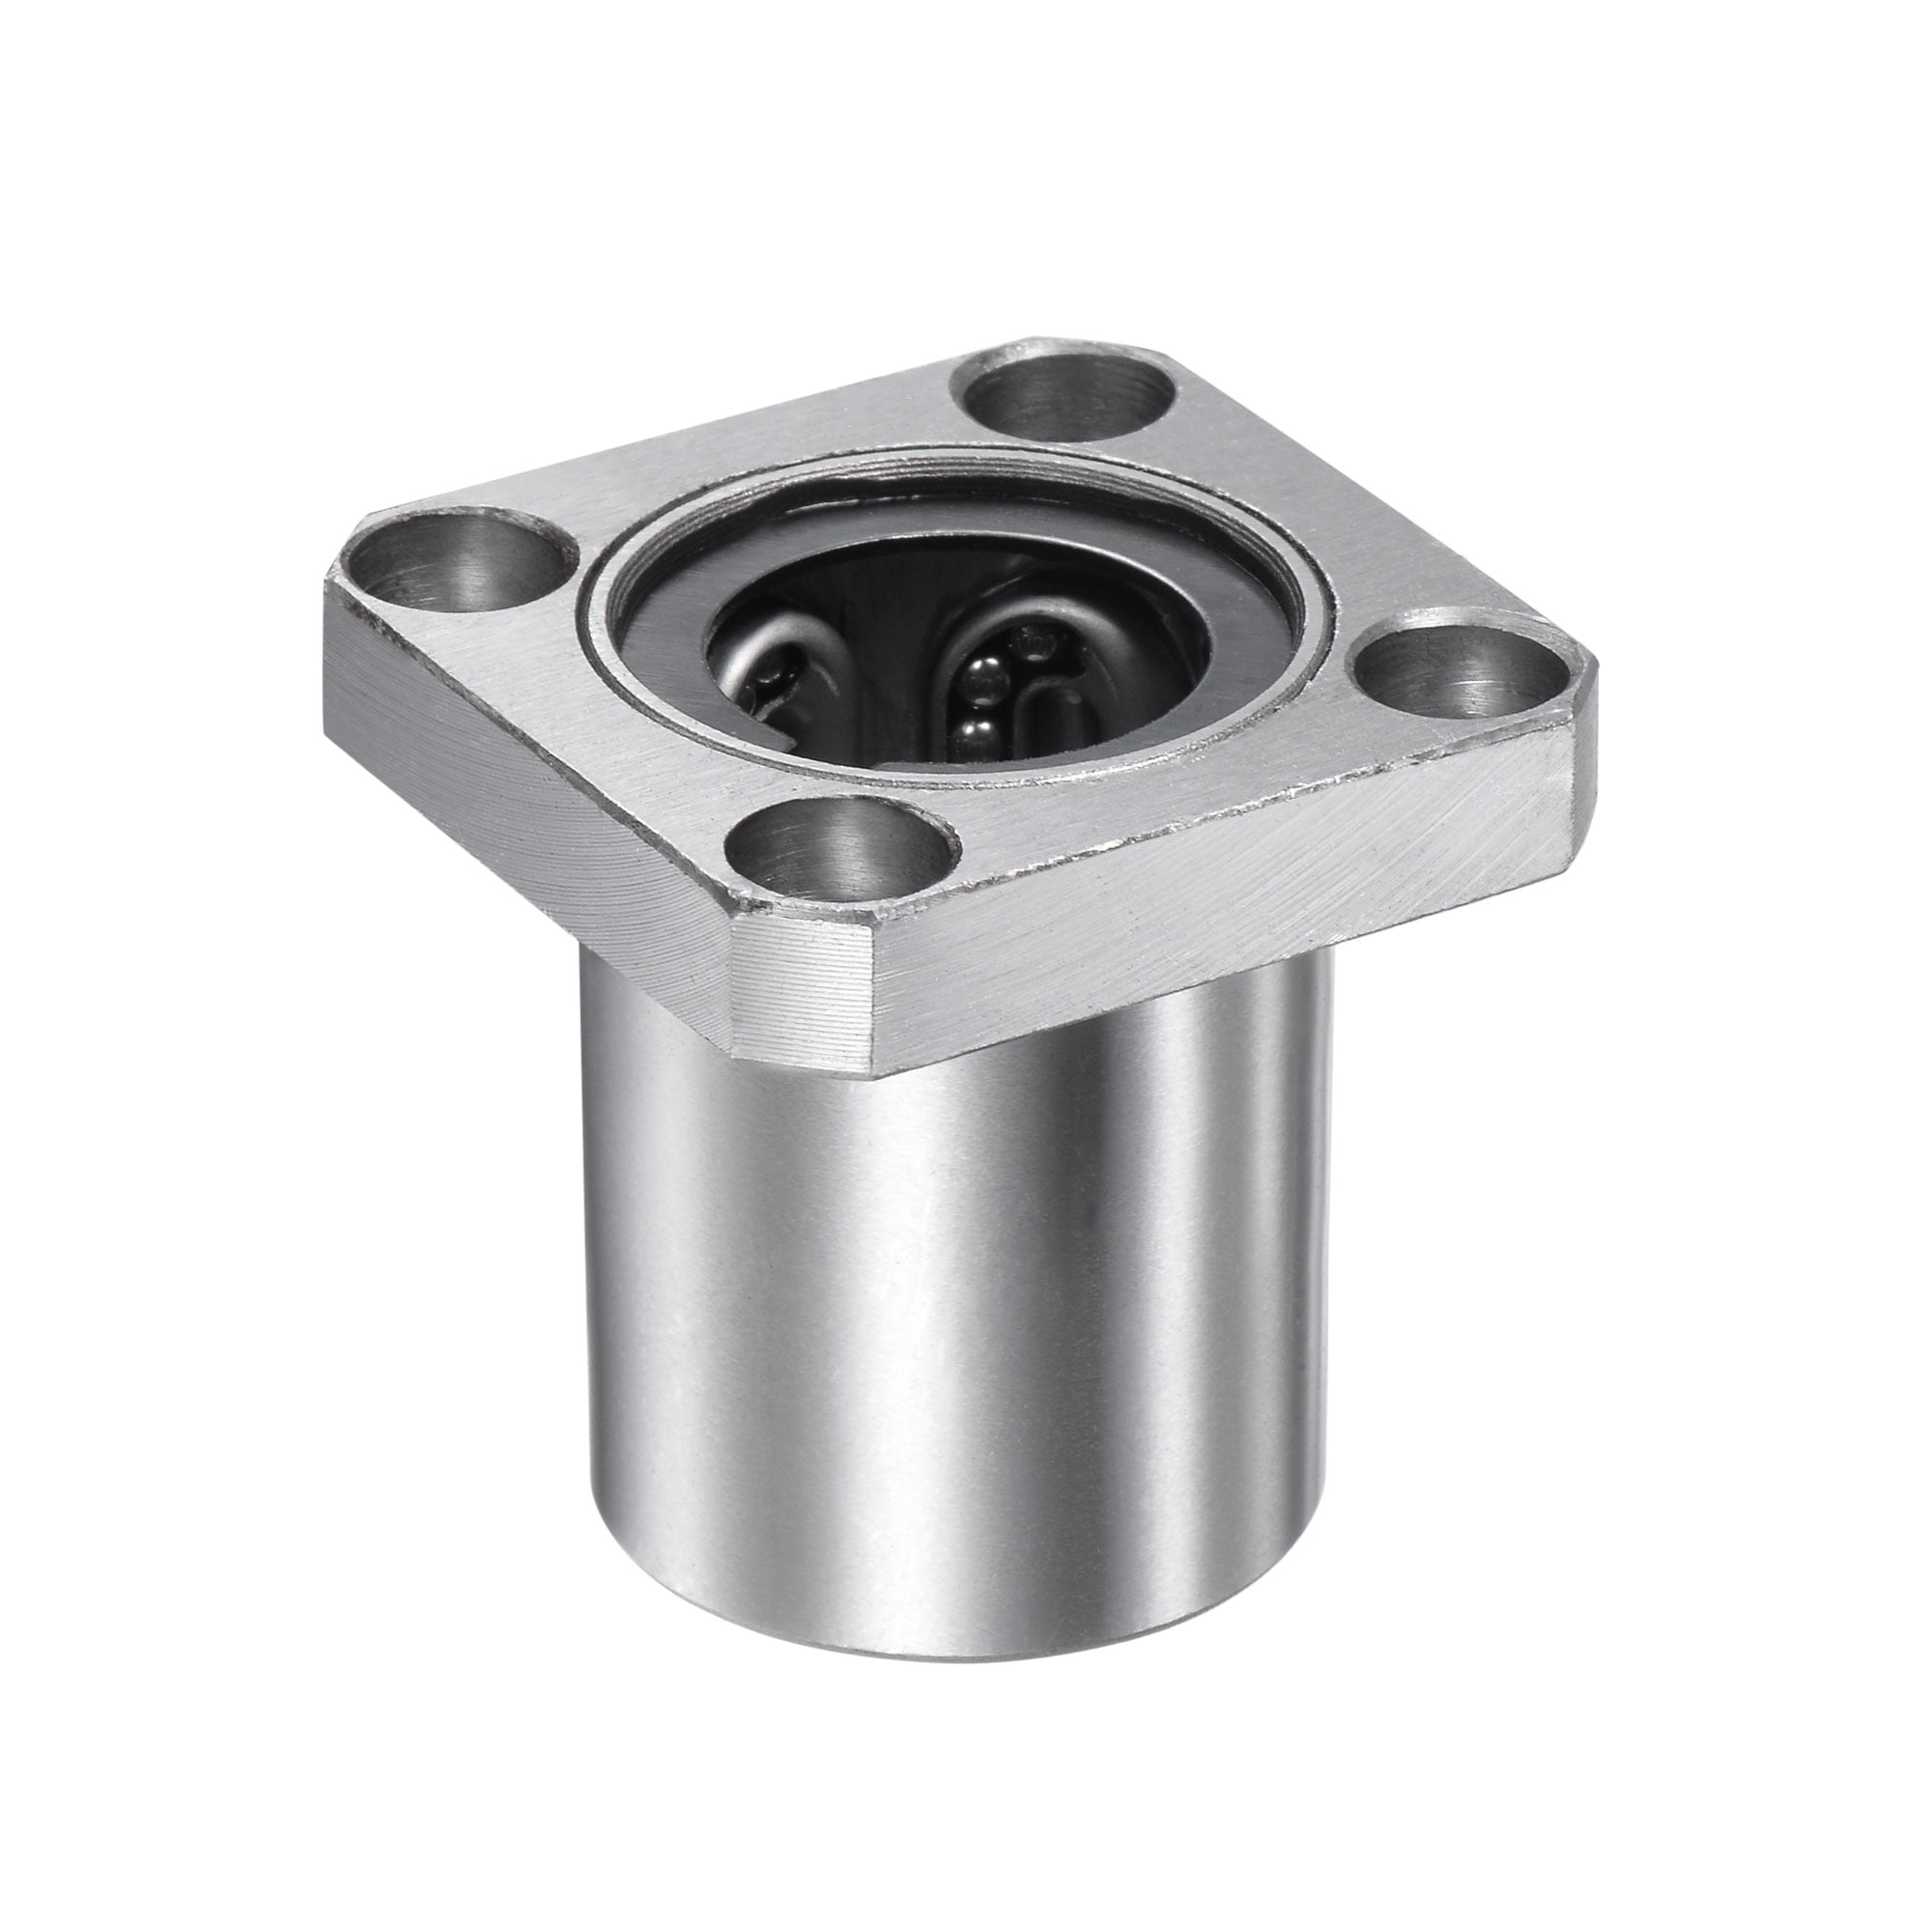 Details about   LMK20GA Linear Ball Bearings 20mmx32mmx42mm Square Flange for CNC 3D Printer 